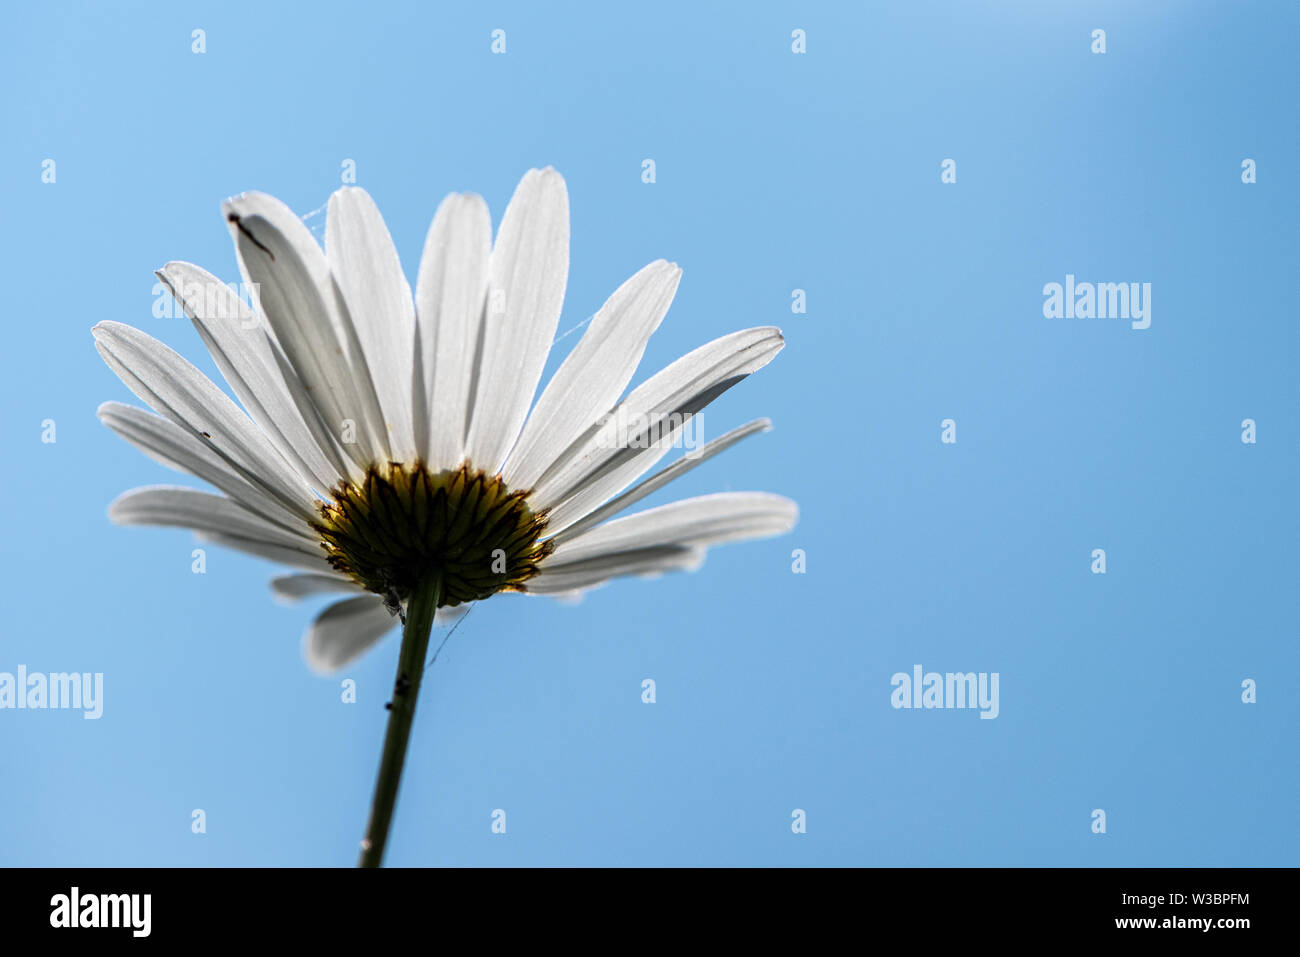 Oxeye daisy against a blue sky, Noar Hill nature reserve, near Selborne, Hampshire, UK Stock Photo